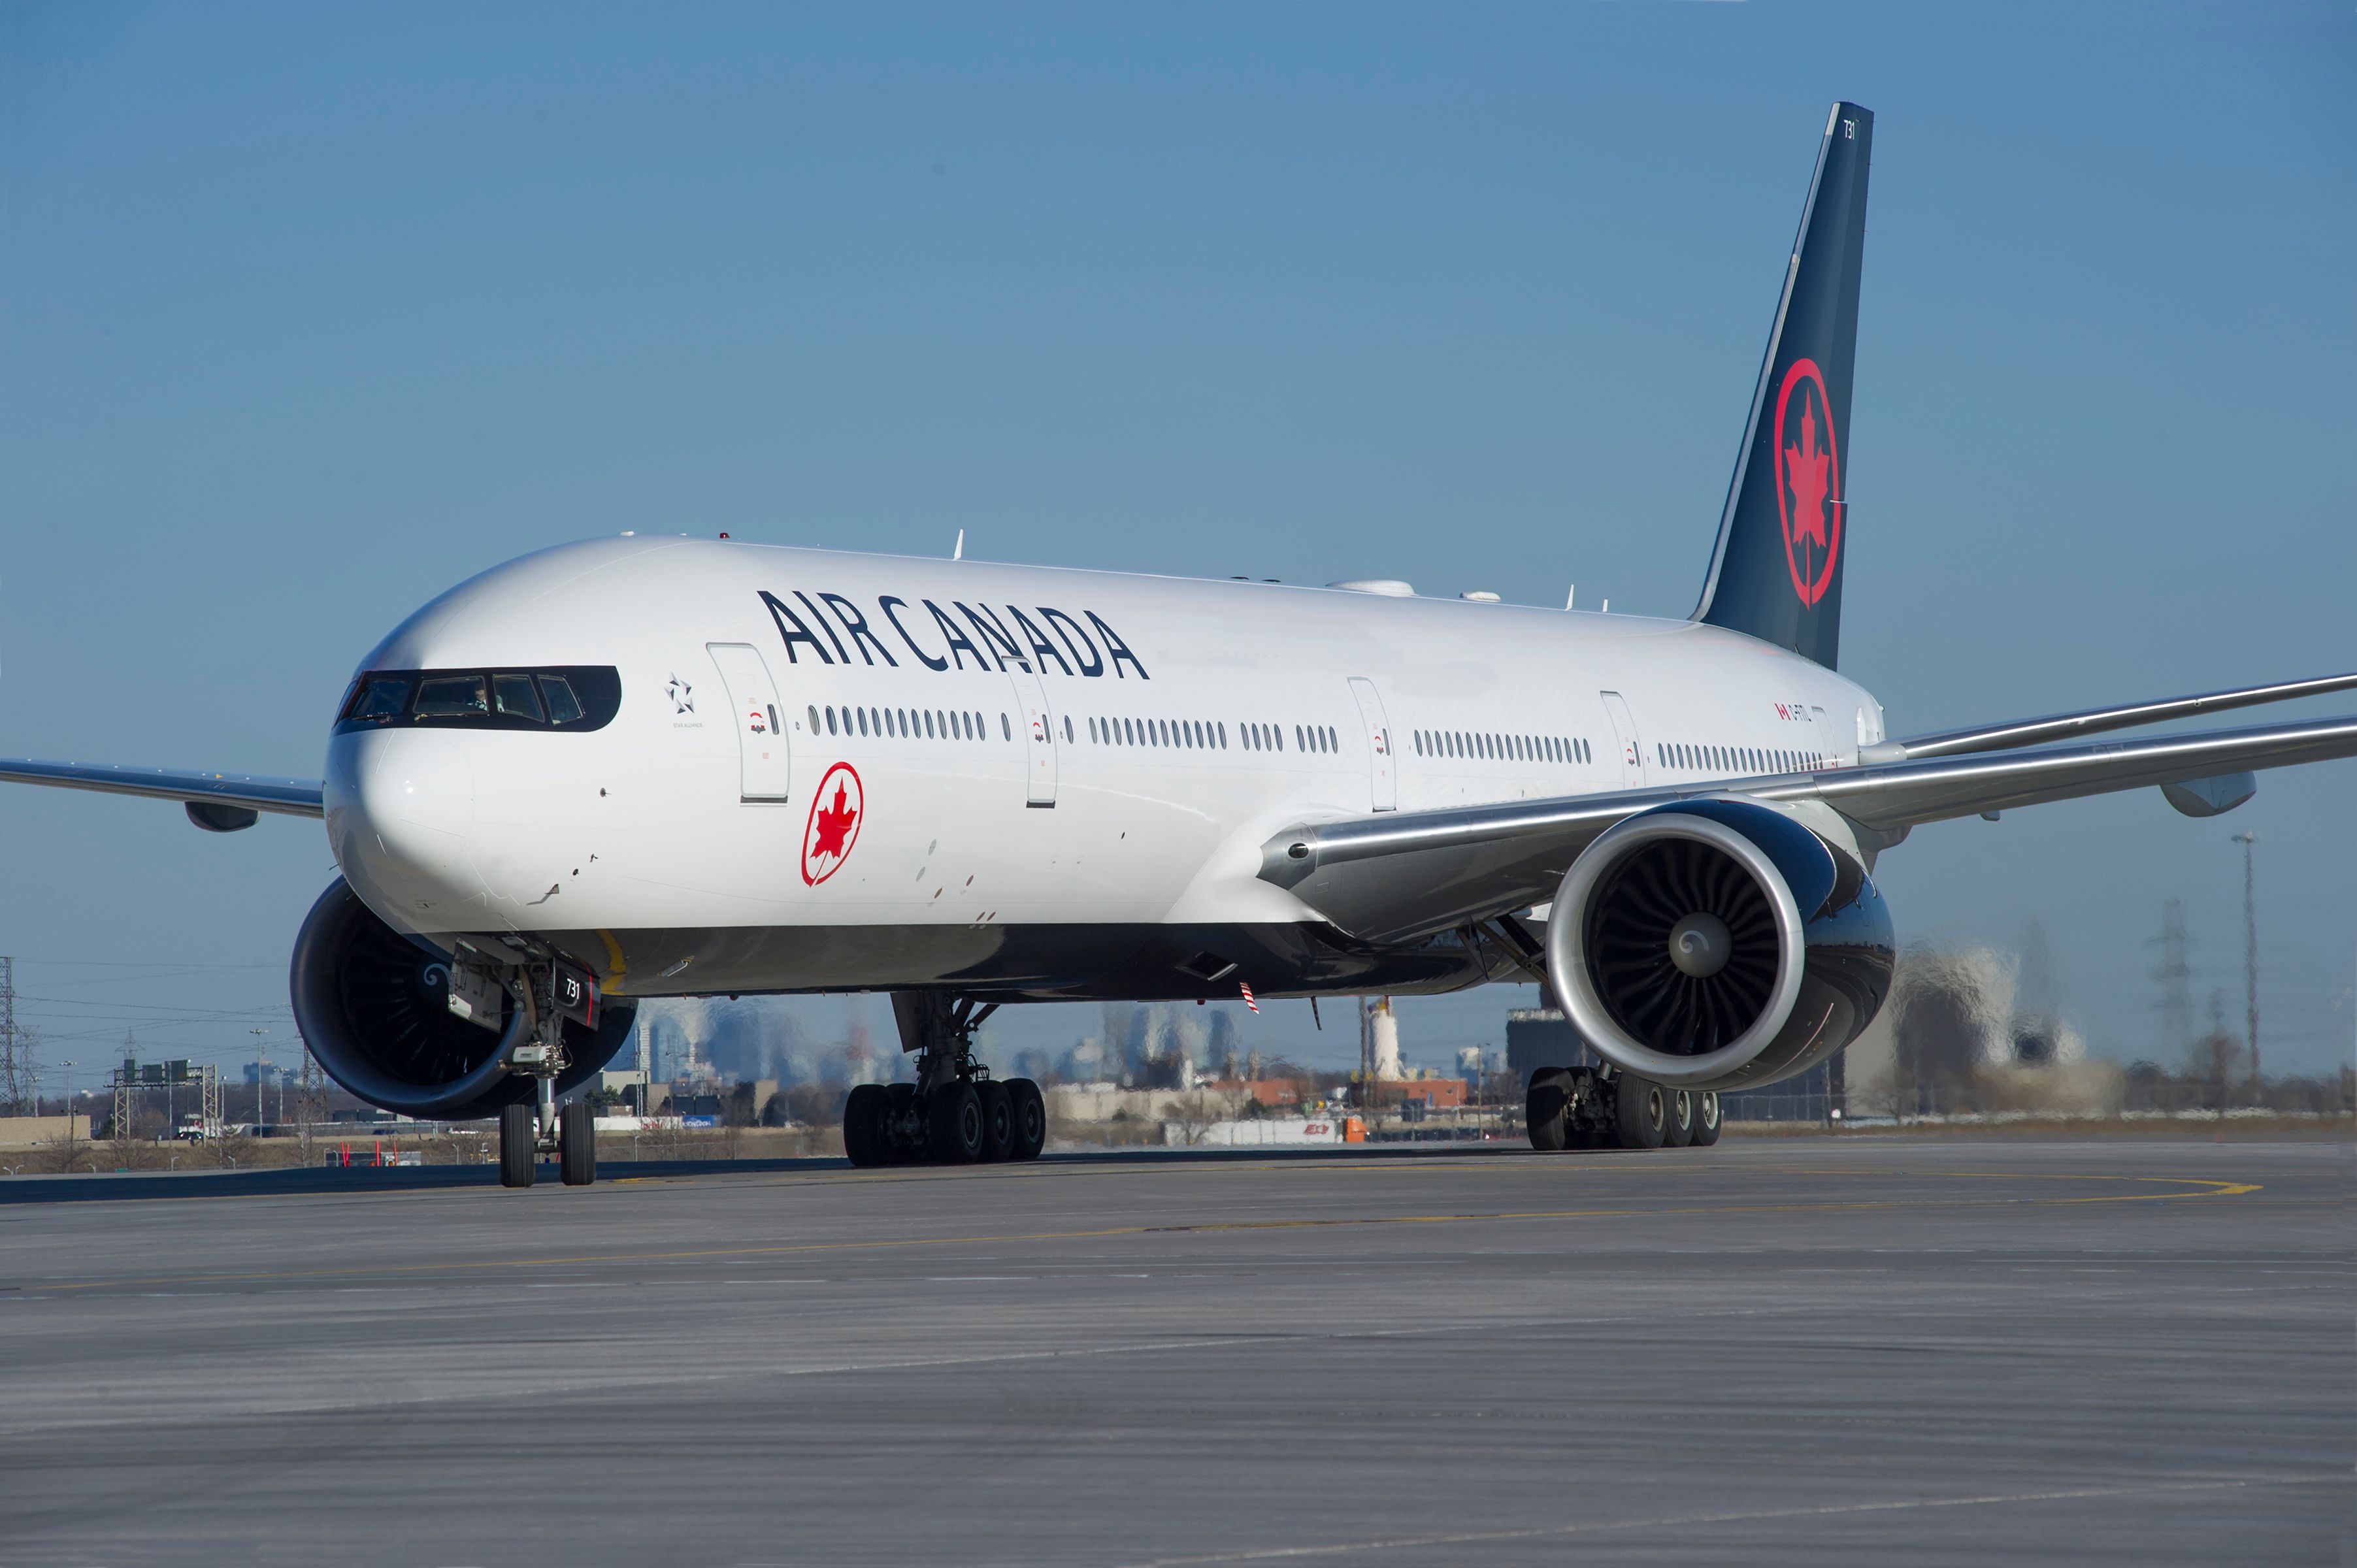 An Air Canada-branded Boeing 777 aircraft on a runway